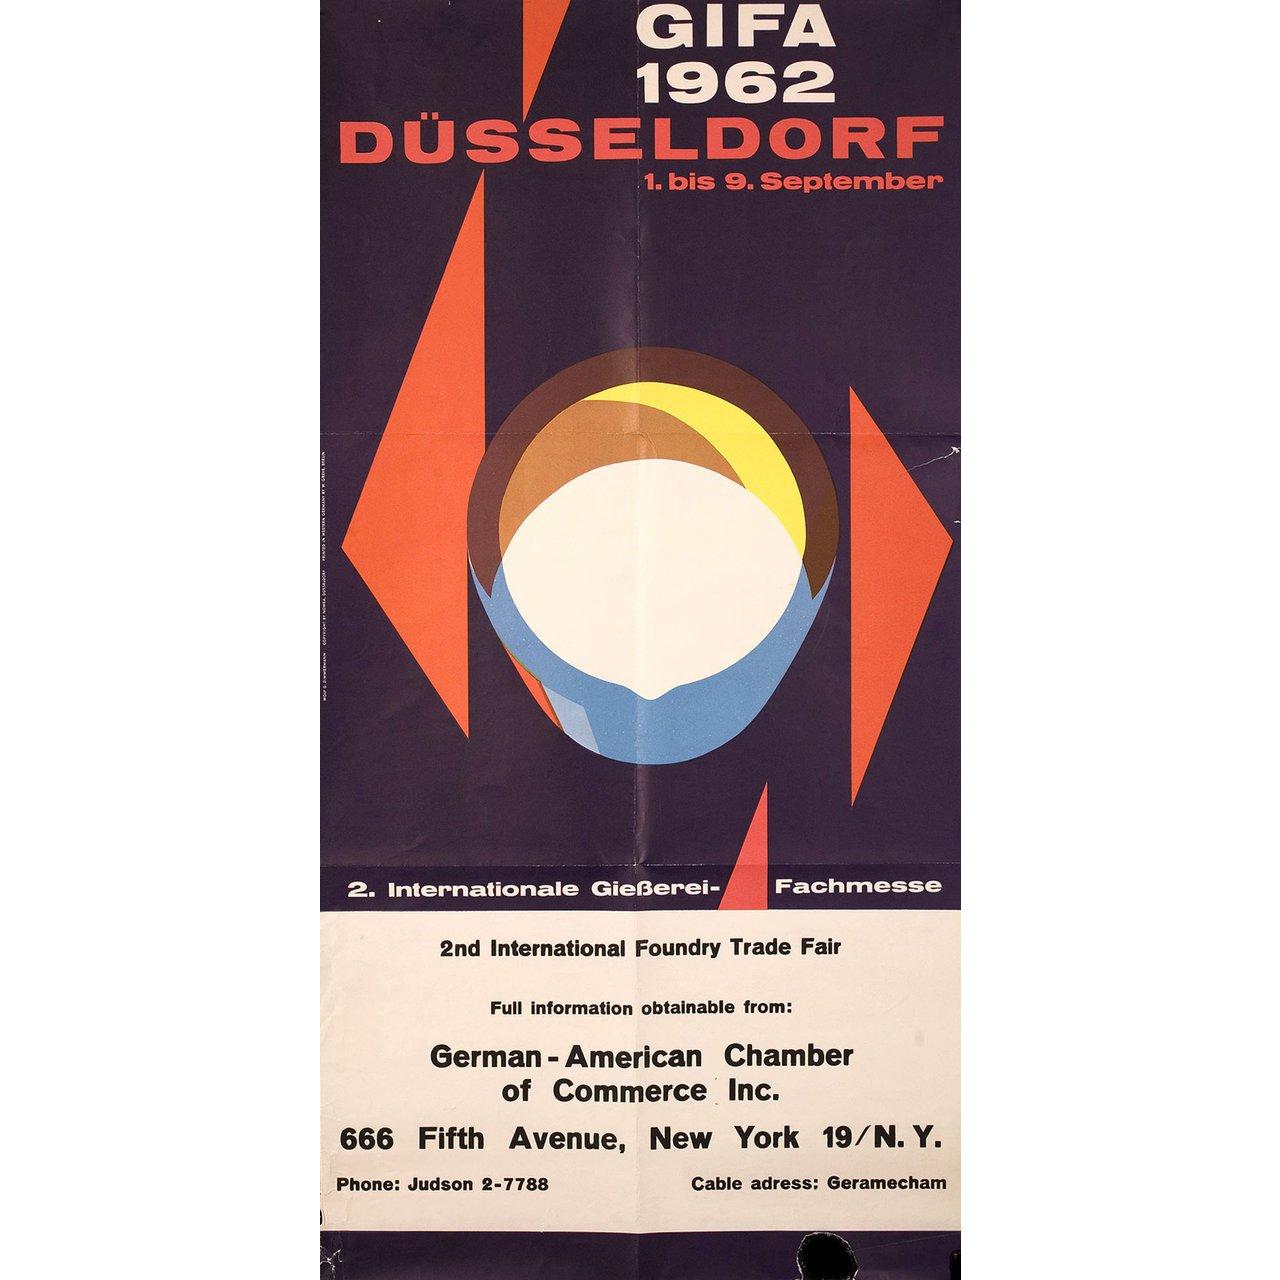 Original 1962 German poster by Wolf Zimmerman for GIFA Dusseldorf, (1962). Very good condition, folded. Many original posters were issued folded or were subsequently folded. Please note: the size is stated in inches and the actual size can vary by